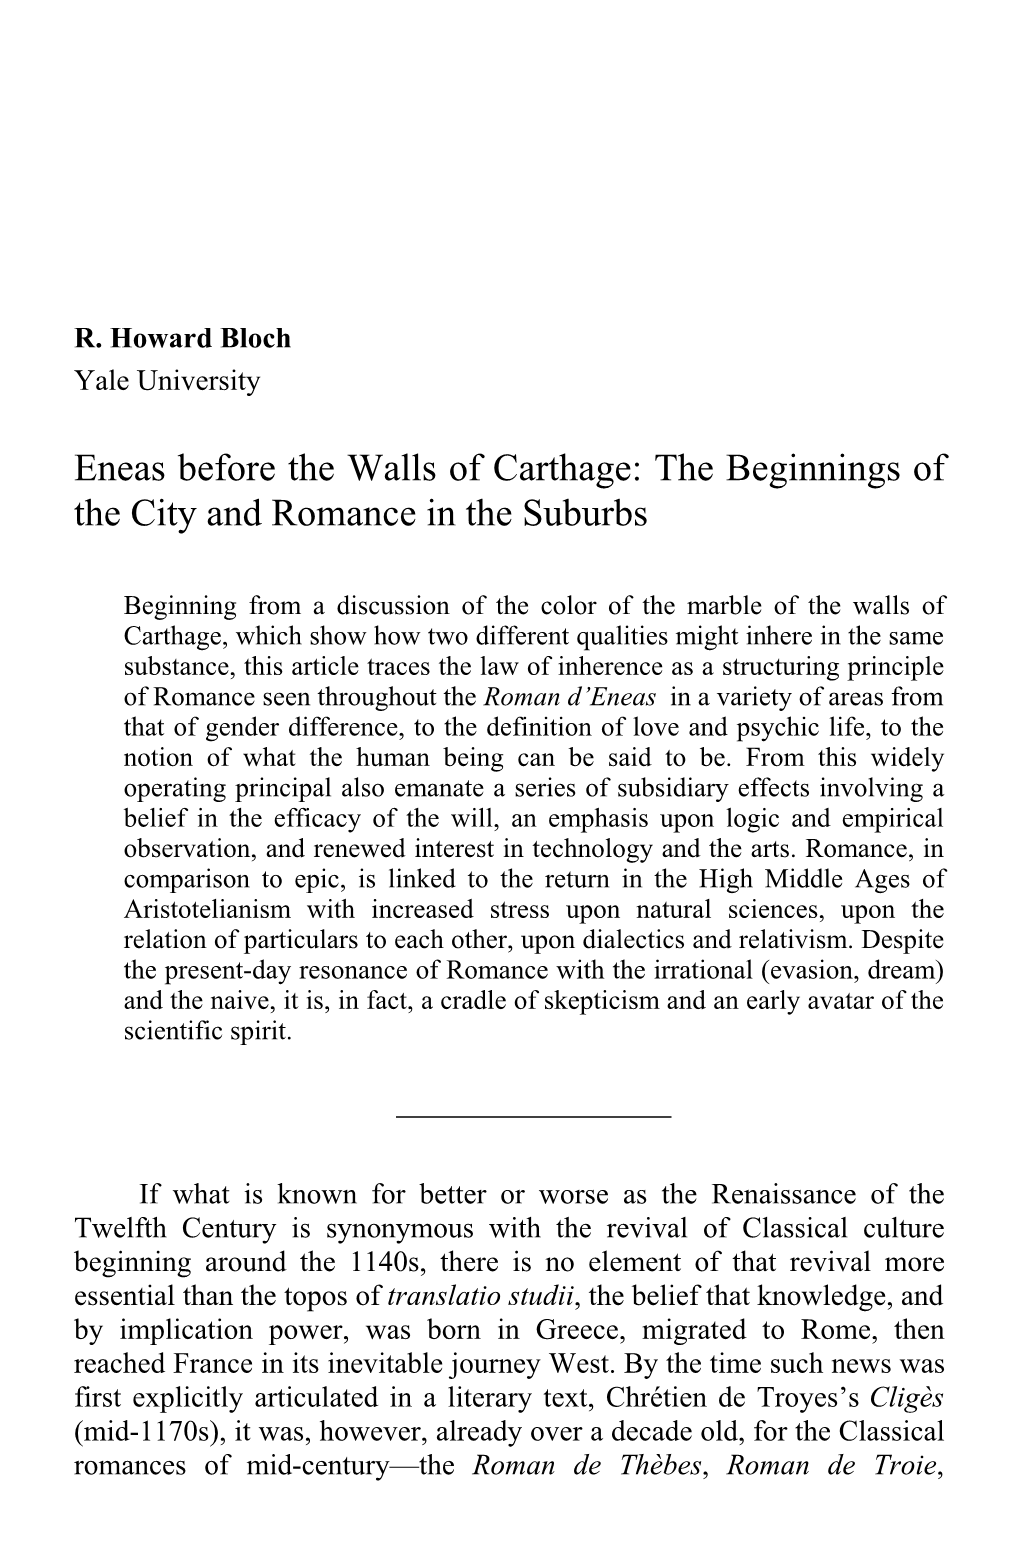 Eneas Before the Walls of Carthage: the Beginnings of the City and Romance in the Suburbs